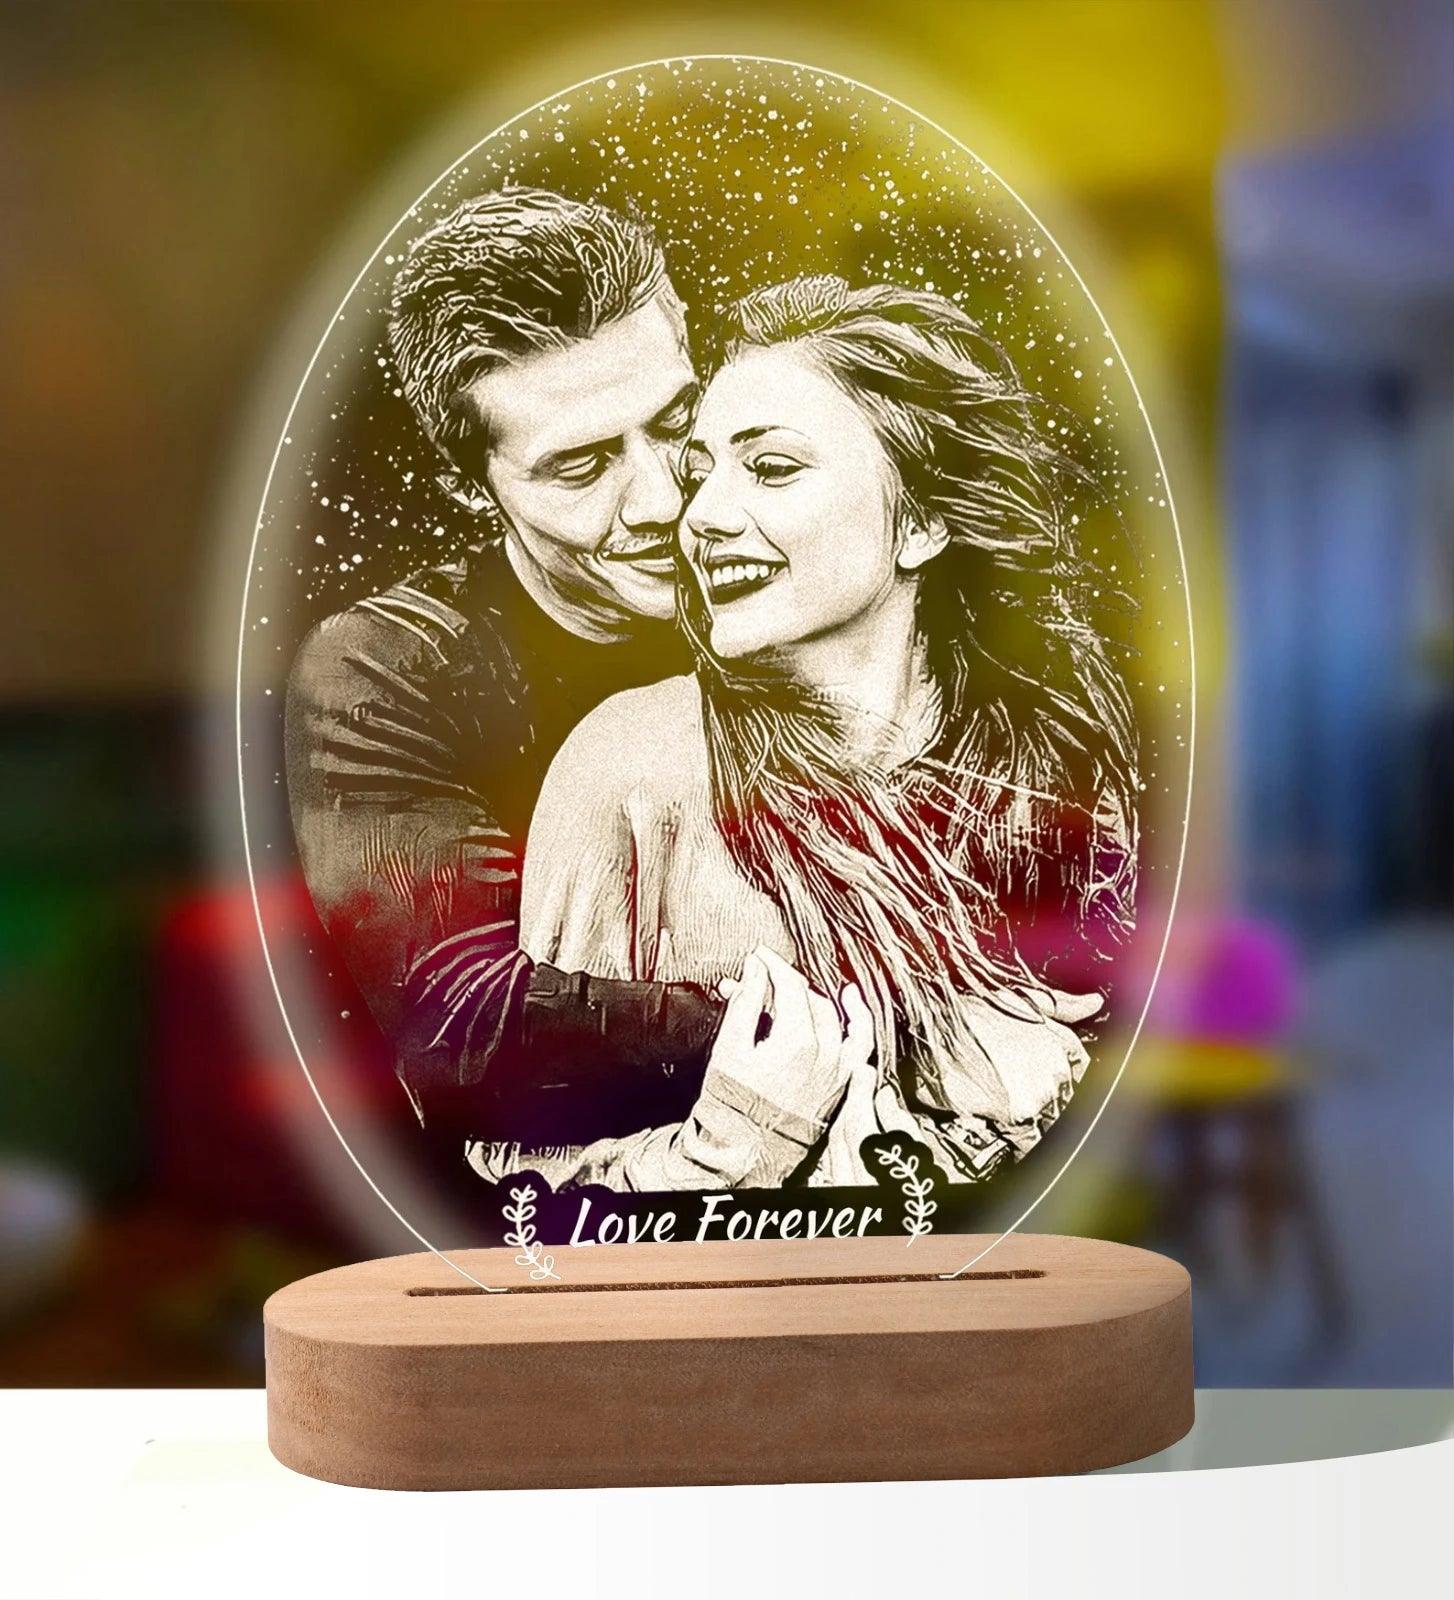 Personalized 3D Photo Lamp with Customized Text and Images - Ideal for Valentine's Day, Weddings, Birthdays, and More  ourlum.com 1-color base 01 